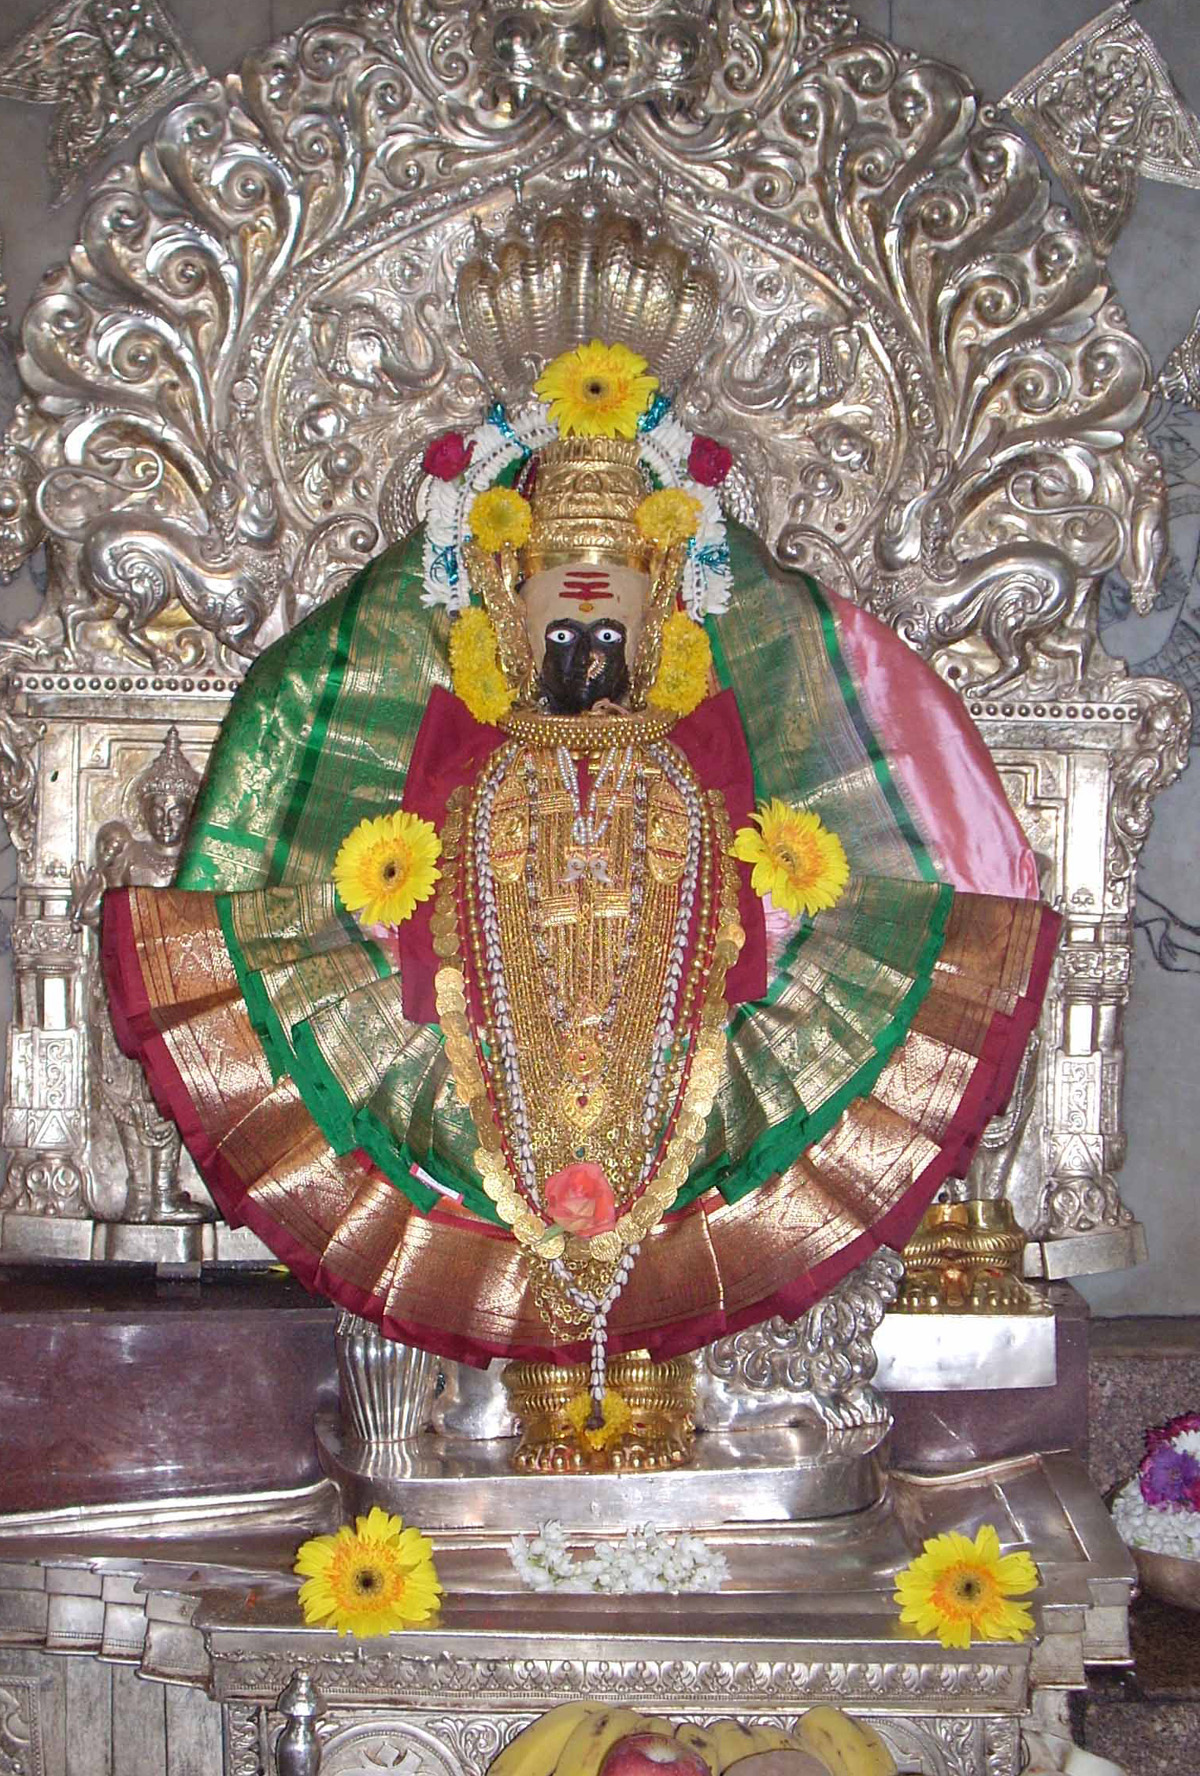 Ambabai Mahalaxmi Mata Pictures Images Photos Religious Wallpaper Hindu God Pictures Free Hd Hindu God Images Download Indian God Photos Goddesses Gurdwara Temples In India Historical Places Tourist Attraction Places